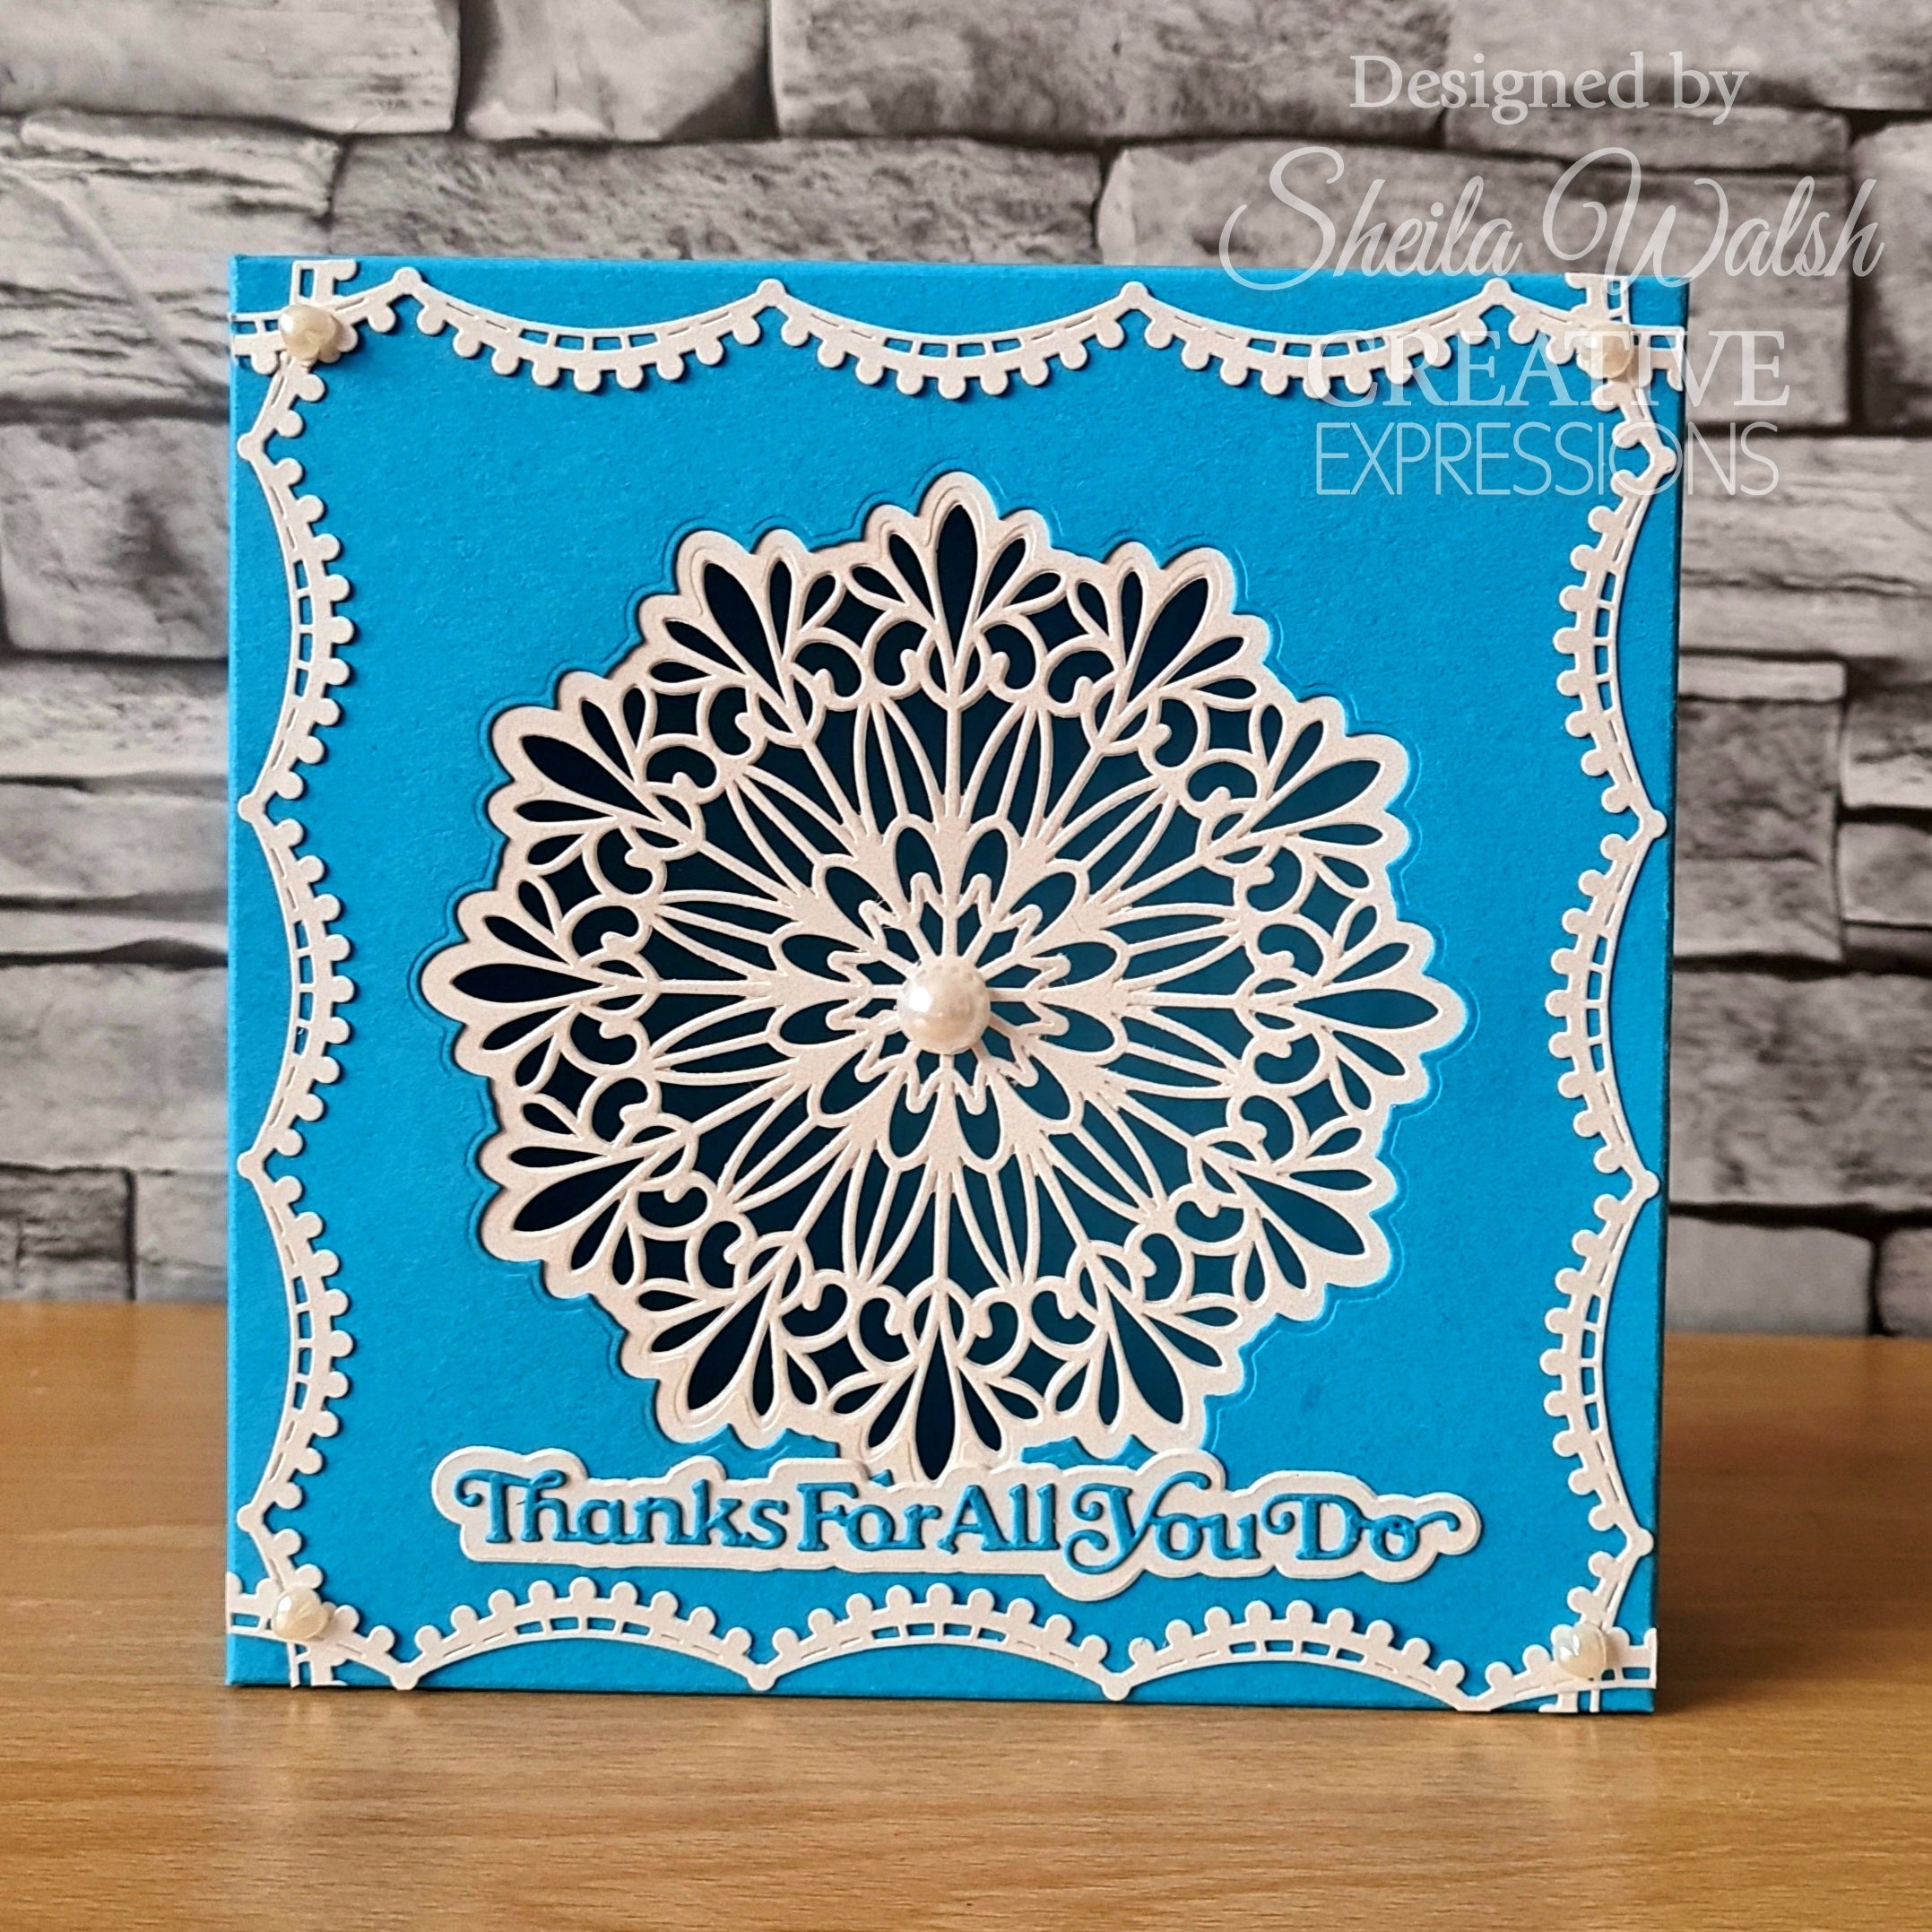 Creative Expressions Sue Wilson Border Coronet Lace Craft Die